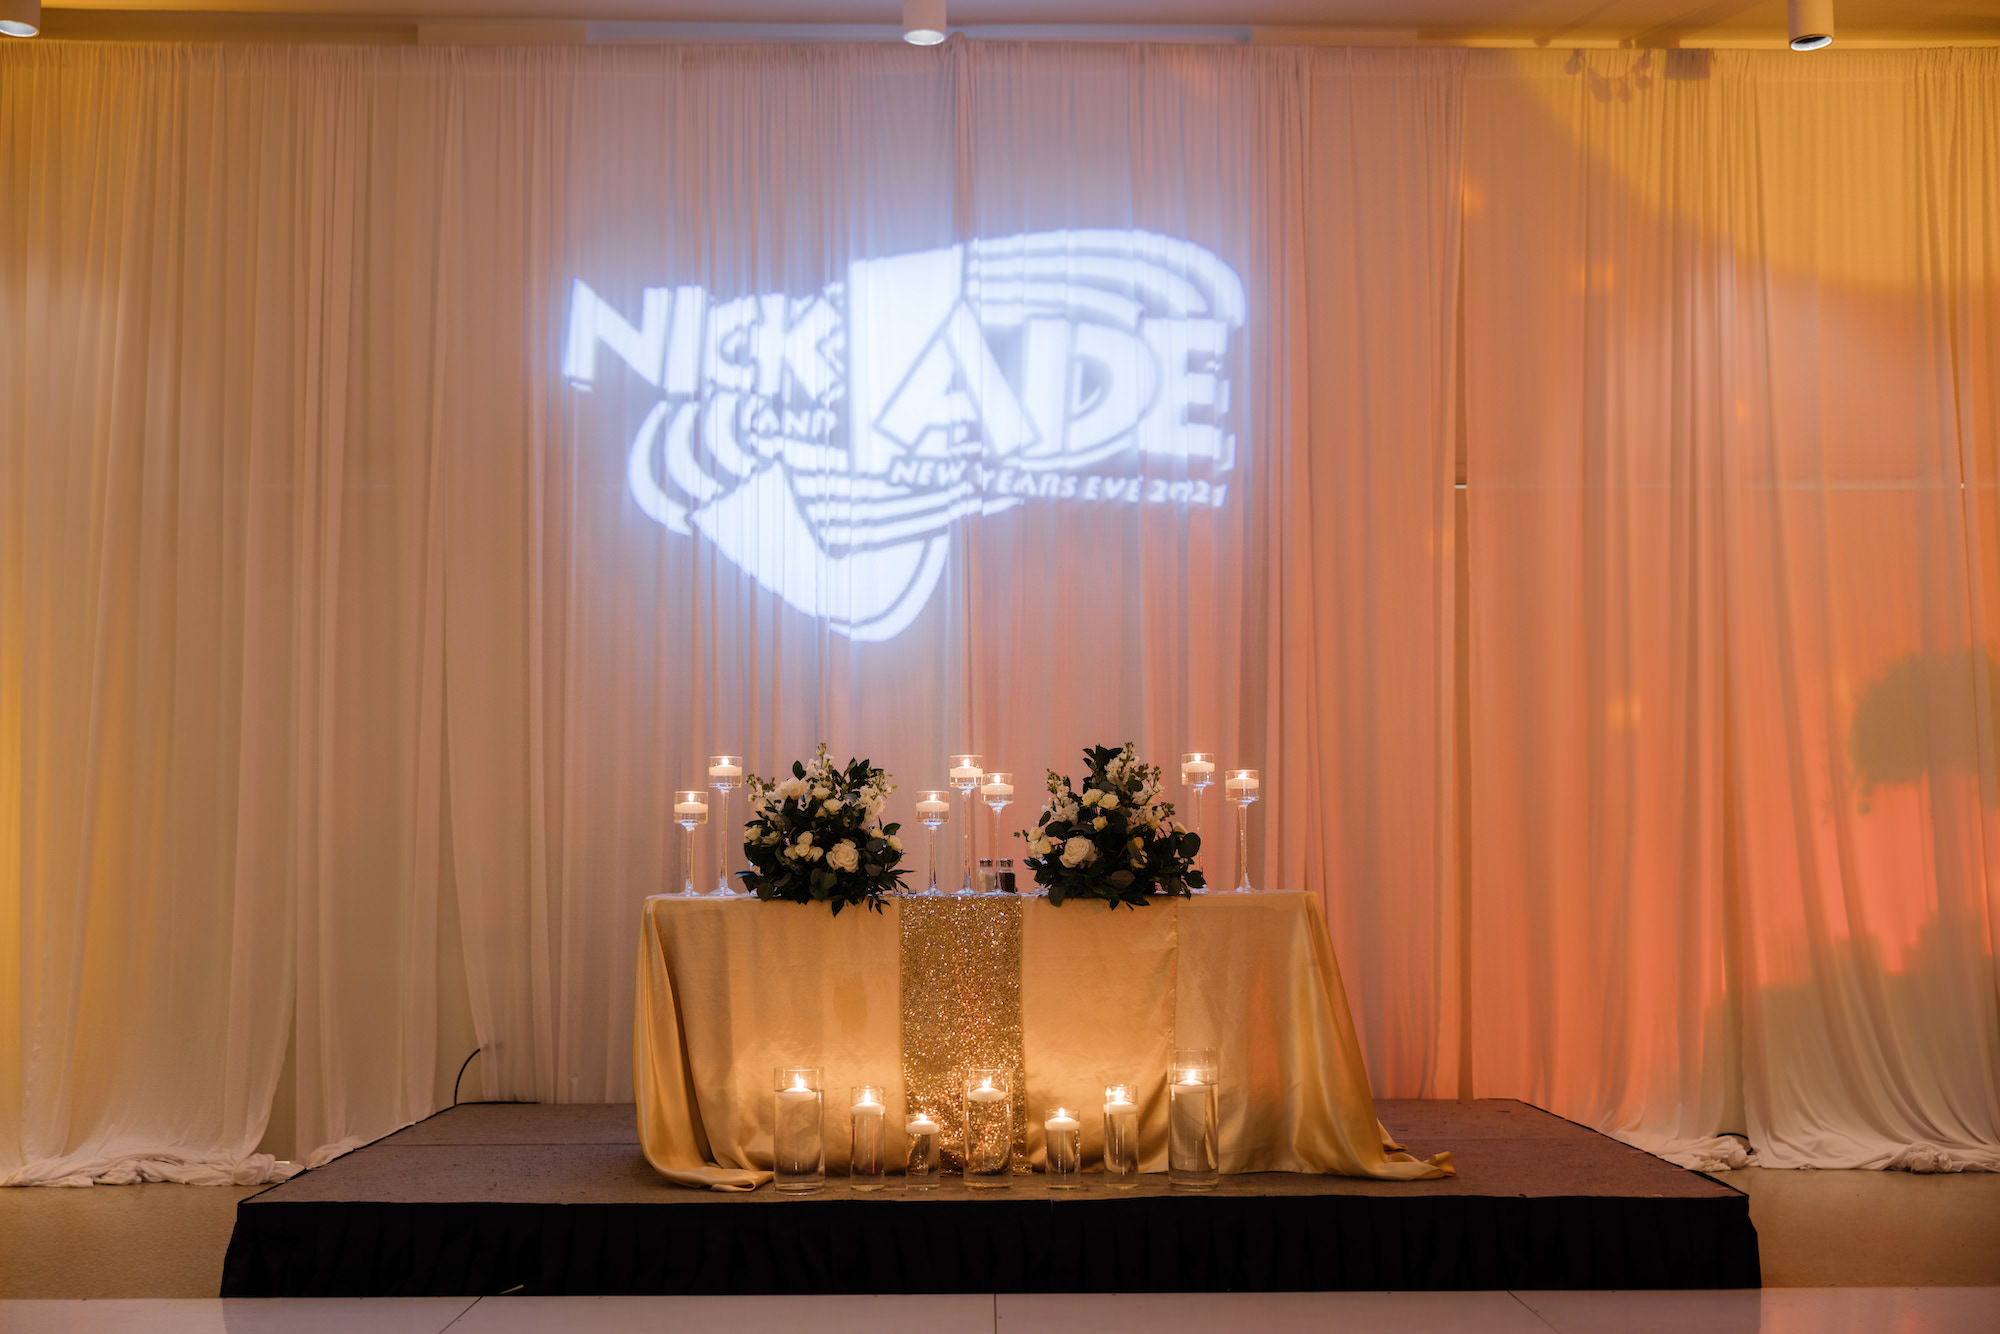 Classic Timeless New Years Eve Wedding Reception Decor, Sweetheart Table with Gold Glitter Table Linen, Floating Candles, Lush White Roses and Greenery Leaves Floral Bouquets, Space Jam Movie Inspired Personalized Projection | Tampa Bay Wedding Florist Tampa Garden Club